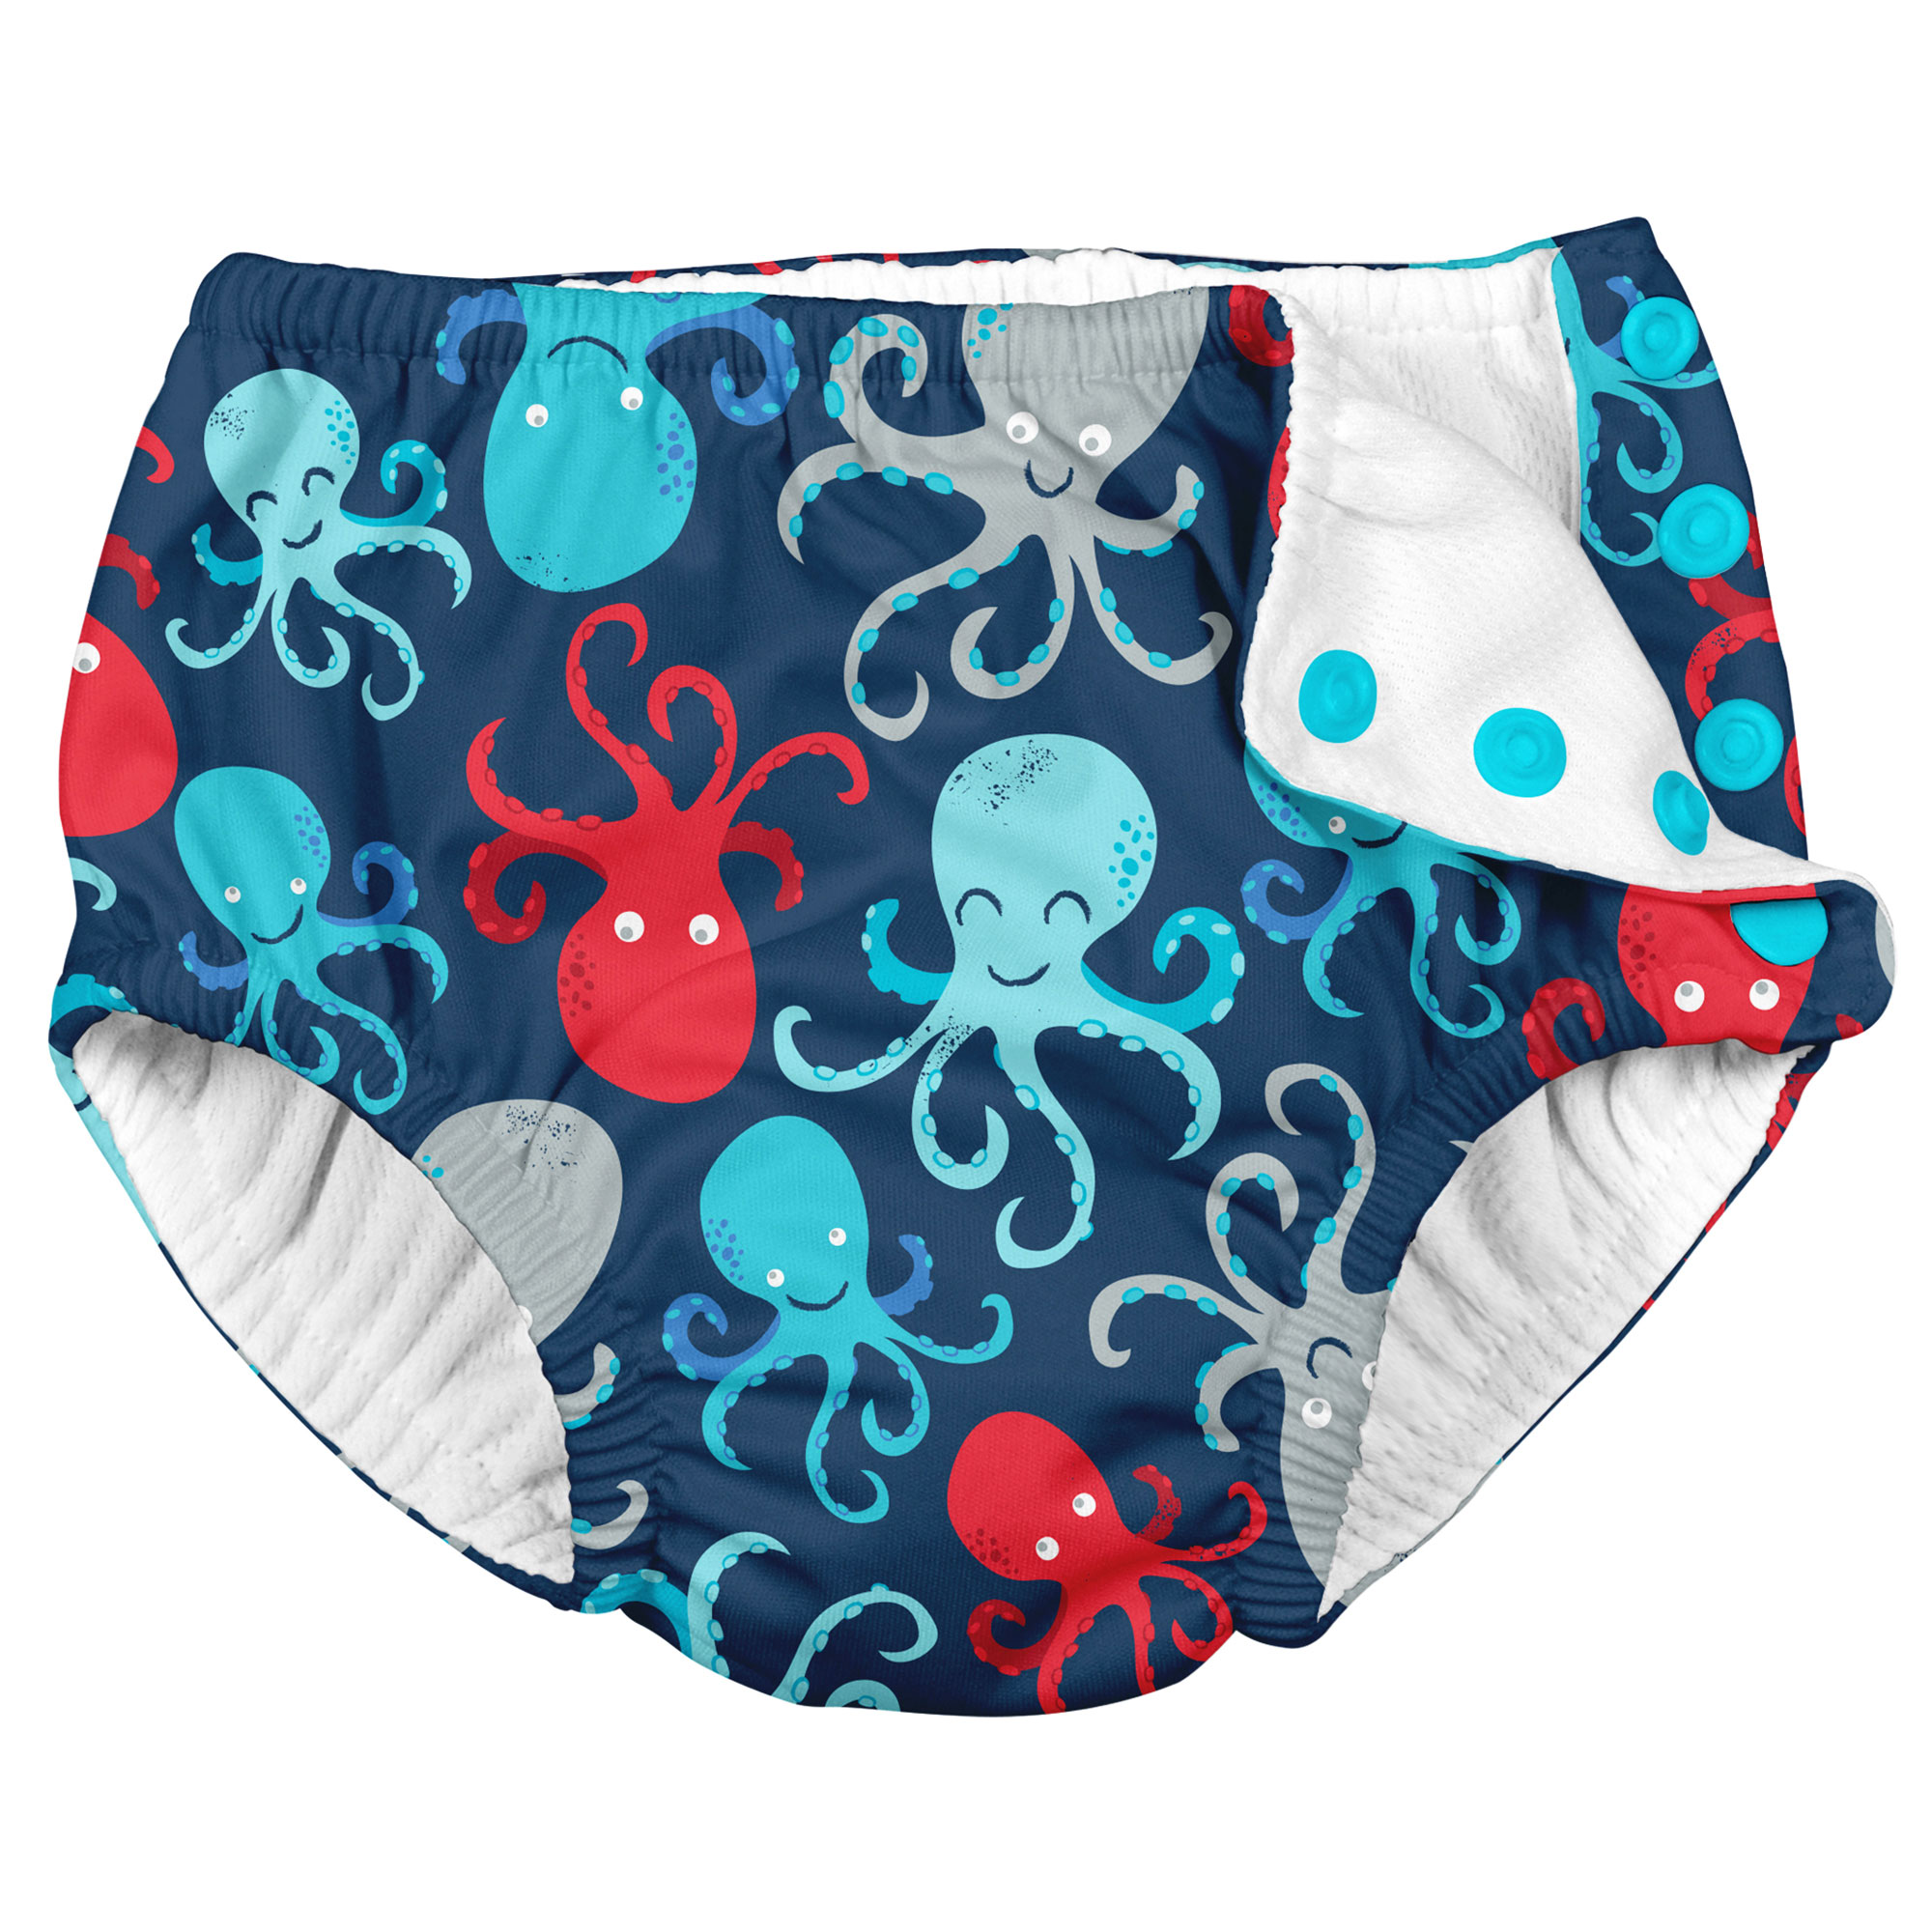 i play Unisex Reusable Absorbent Baby Swim Diapers - Swimming Suit Bottom | No Other Diaper Necessary Navy Octopus 18 Months - image 1 of 7